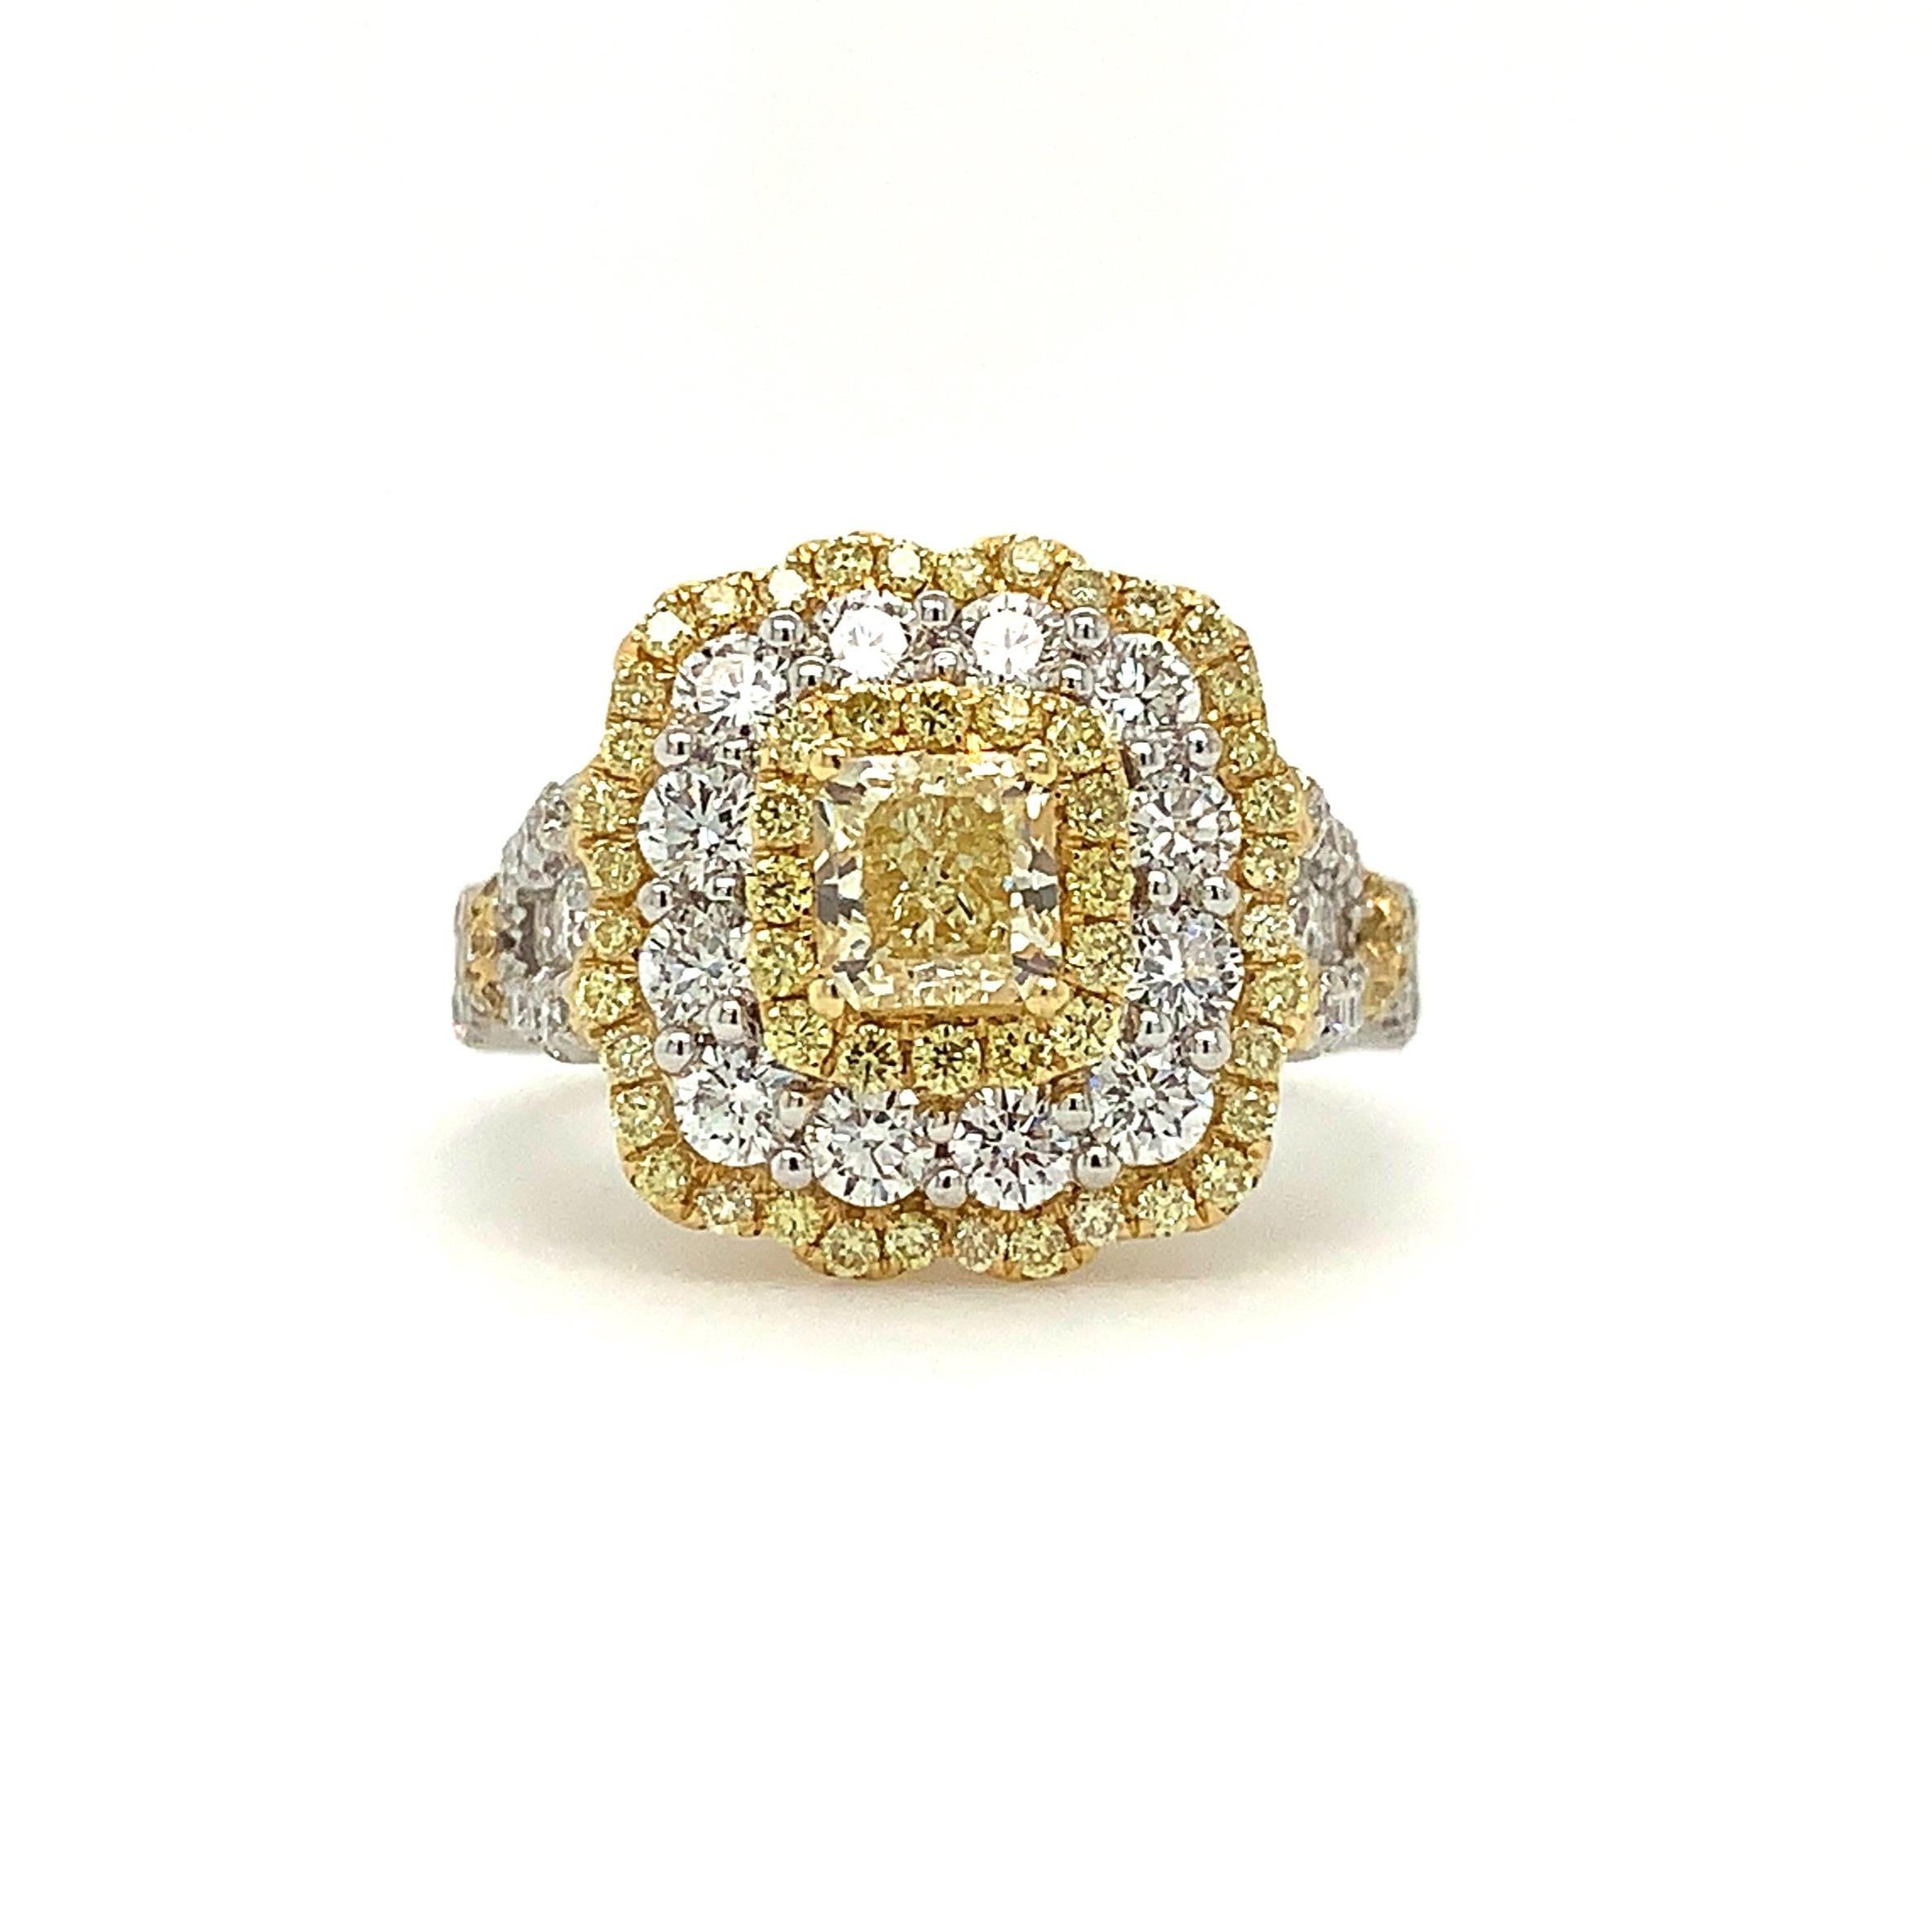 This Roman + Jules Very Fine Quality Diamond Ring features a Fancy Intense Yellow Pavée Set, composed of 48 Round Brilliant Yellow Diamonds amounting to 0.48ctw of Vivid Intense Yellow VS clarity, as well as 48 Round Brilliant White Ideal Cut